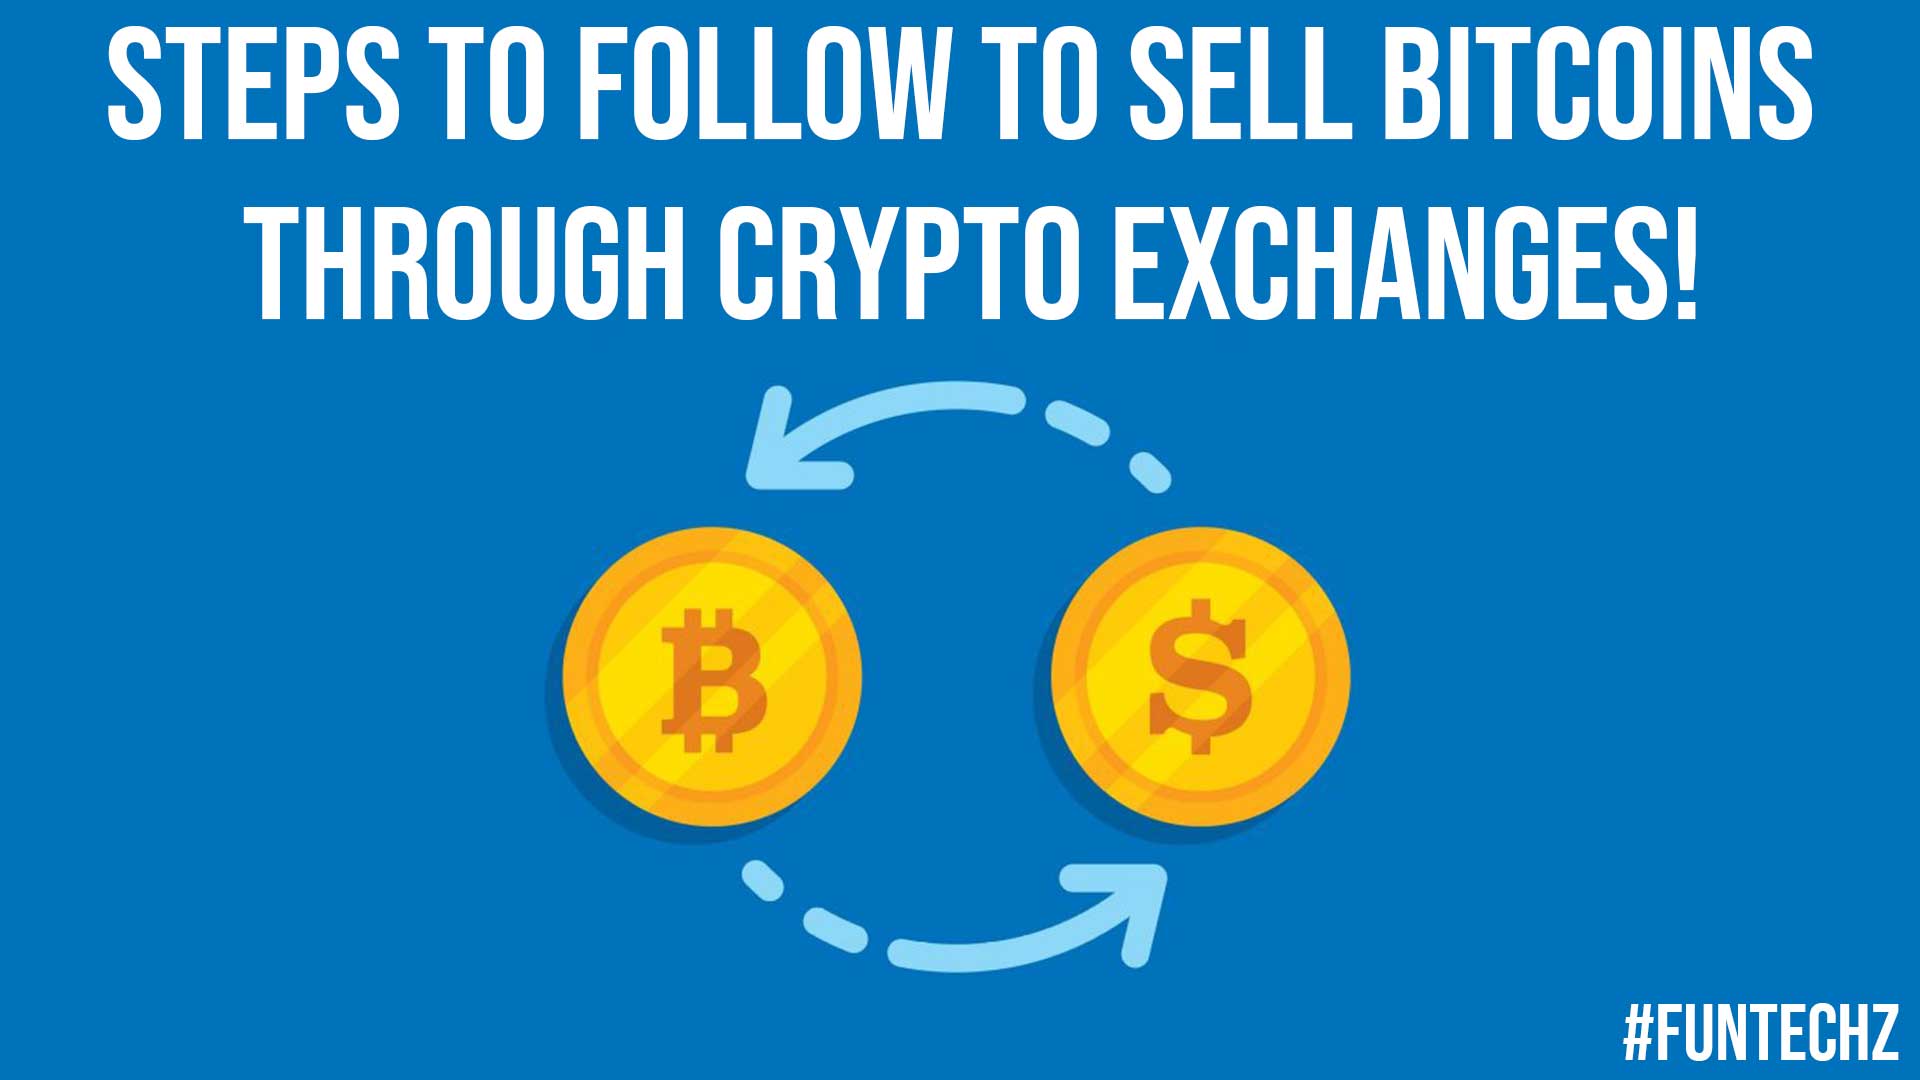 Steps to Follow to Sell Bitcoins Through Crypto Exchanges